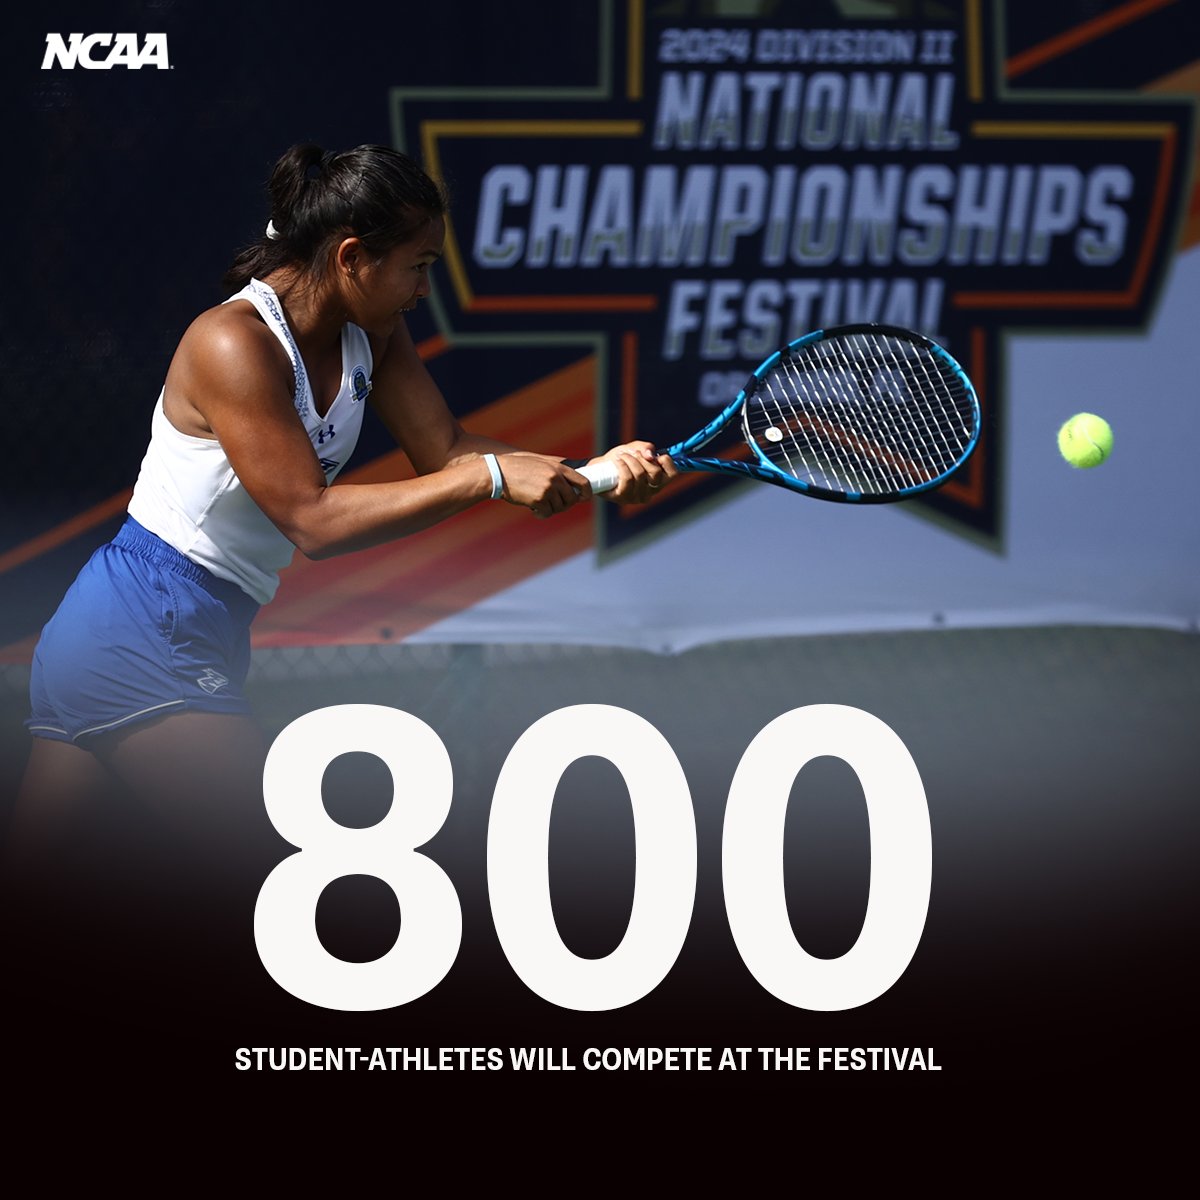 #D2Festival Festival is here! 🎉 📍Orlando @NCAADII | on.ncaa.com/diifest24 Festival by the numbers ⤵️ The festival will feature championships in six sports: men's and women's golf, women's lacrosse, softball and men's and women's tennis. Six winners of the Elite 90 award,